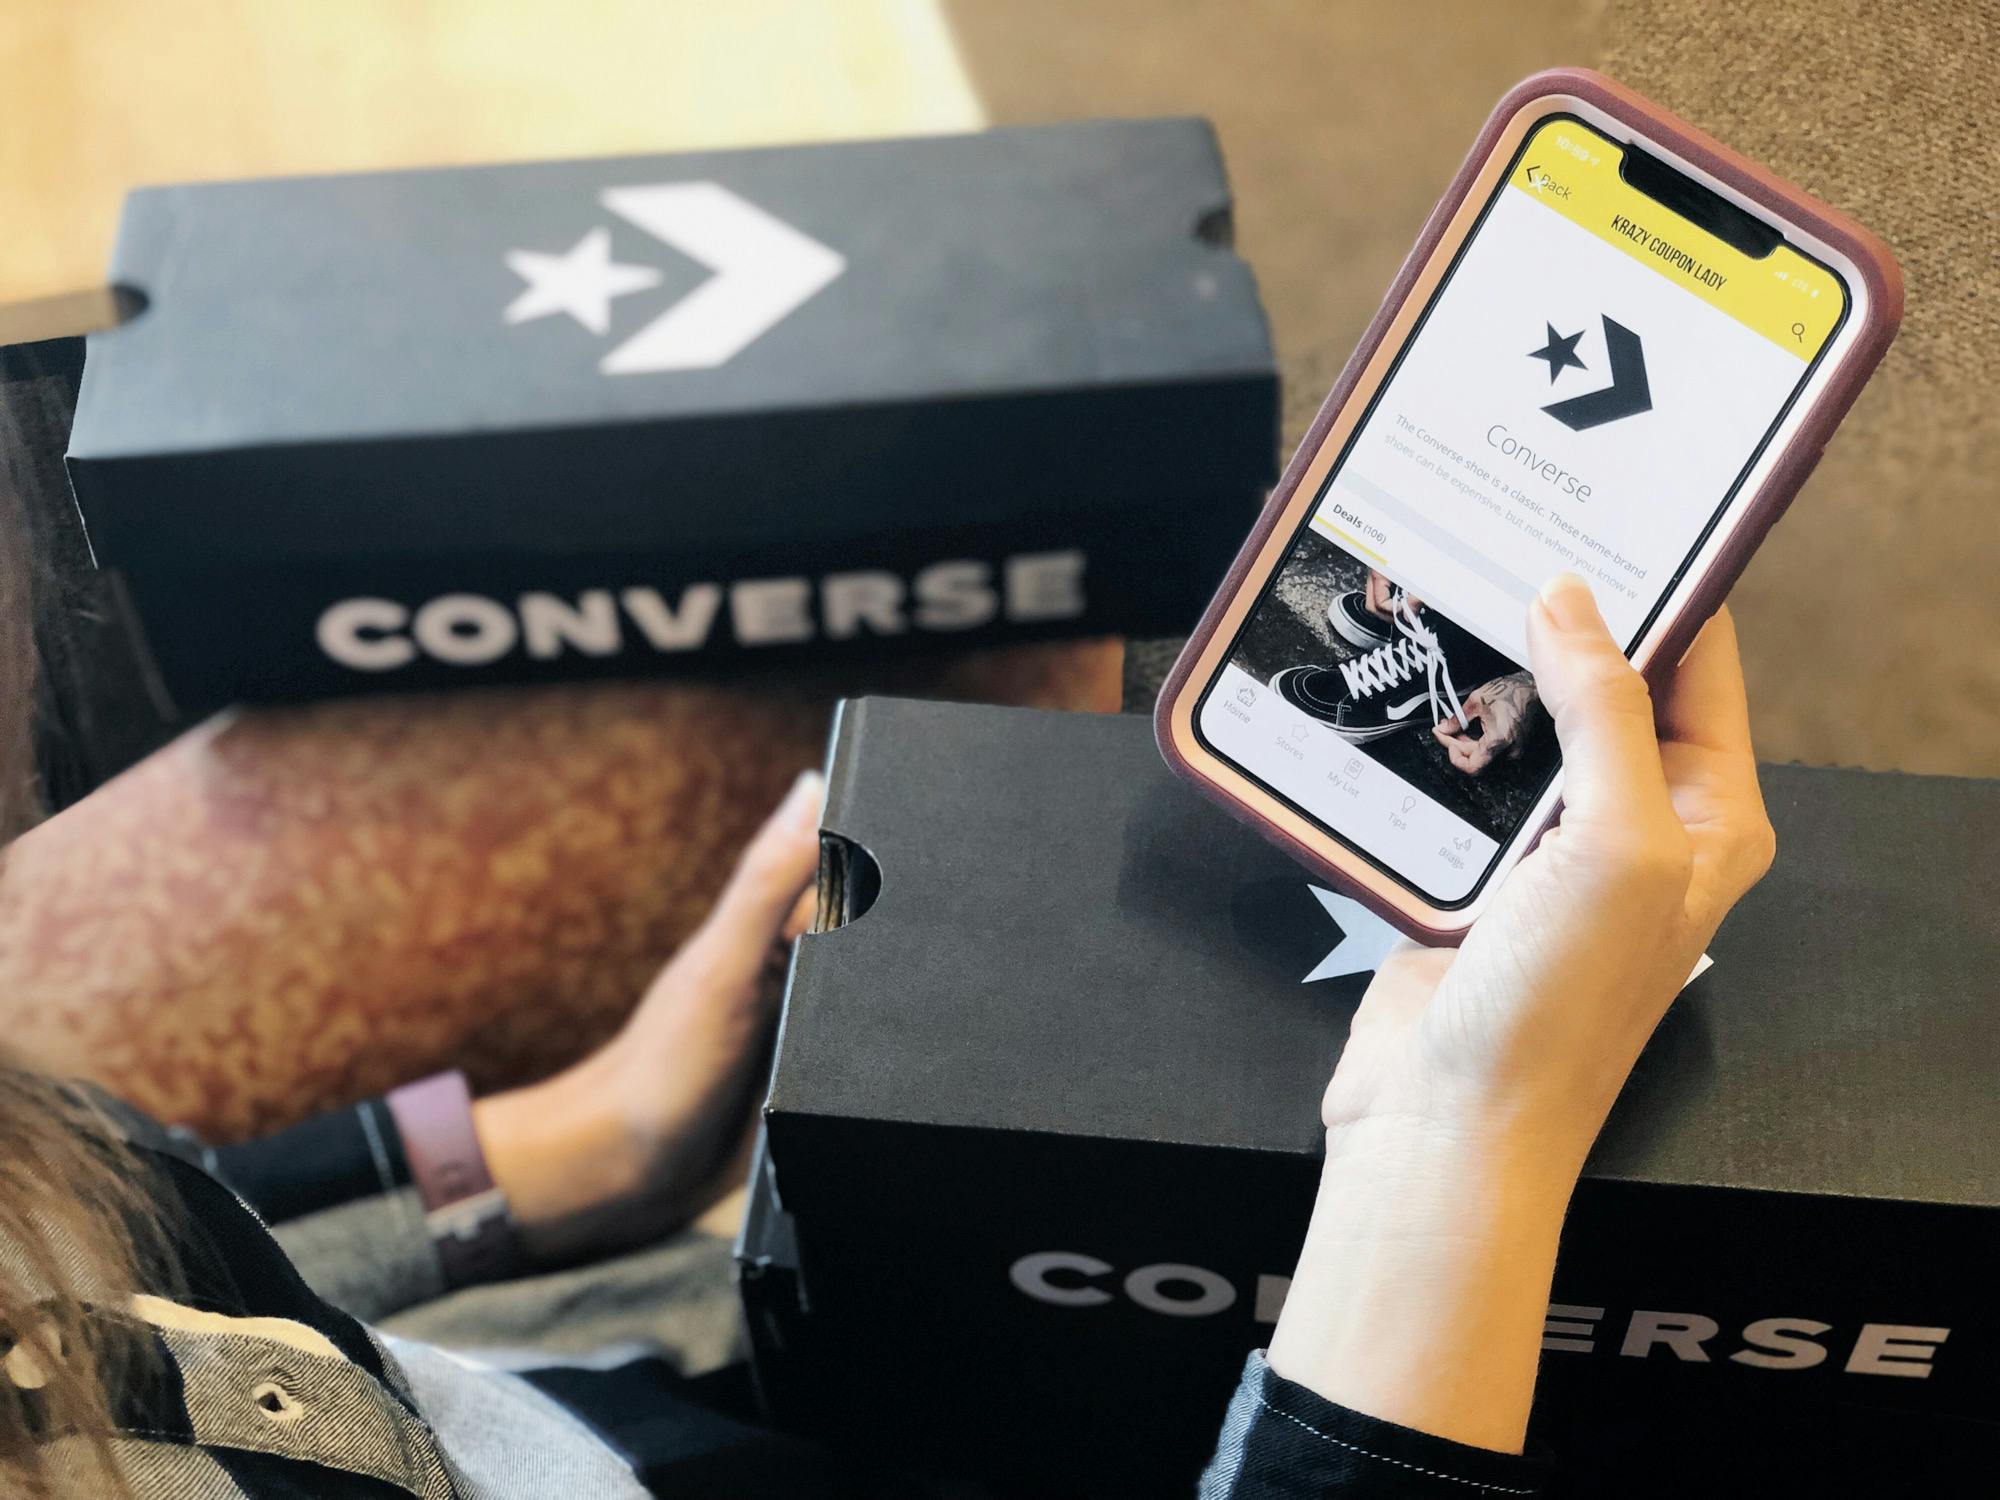 discount on converse shoes